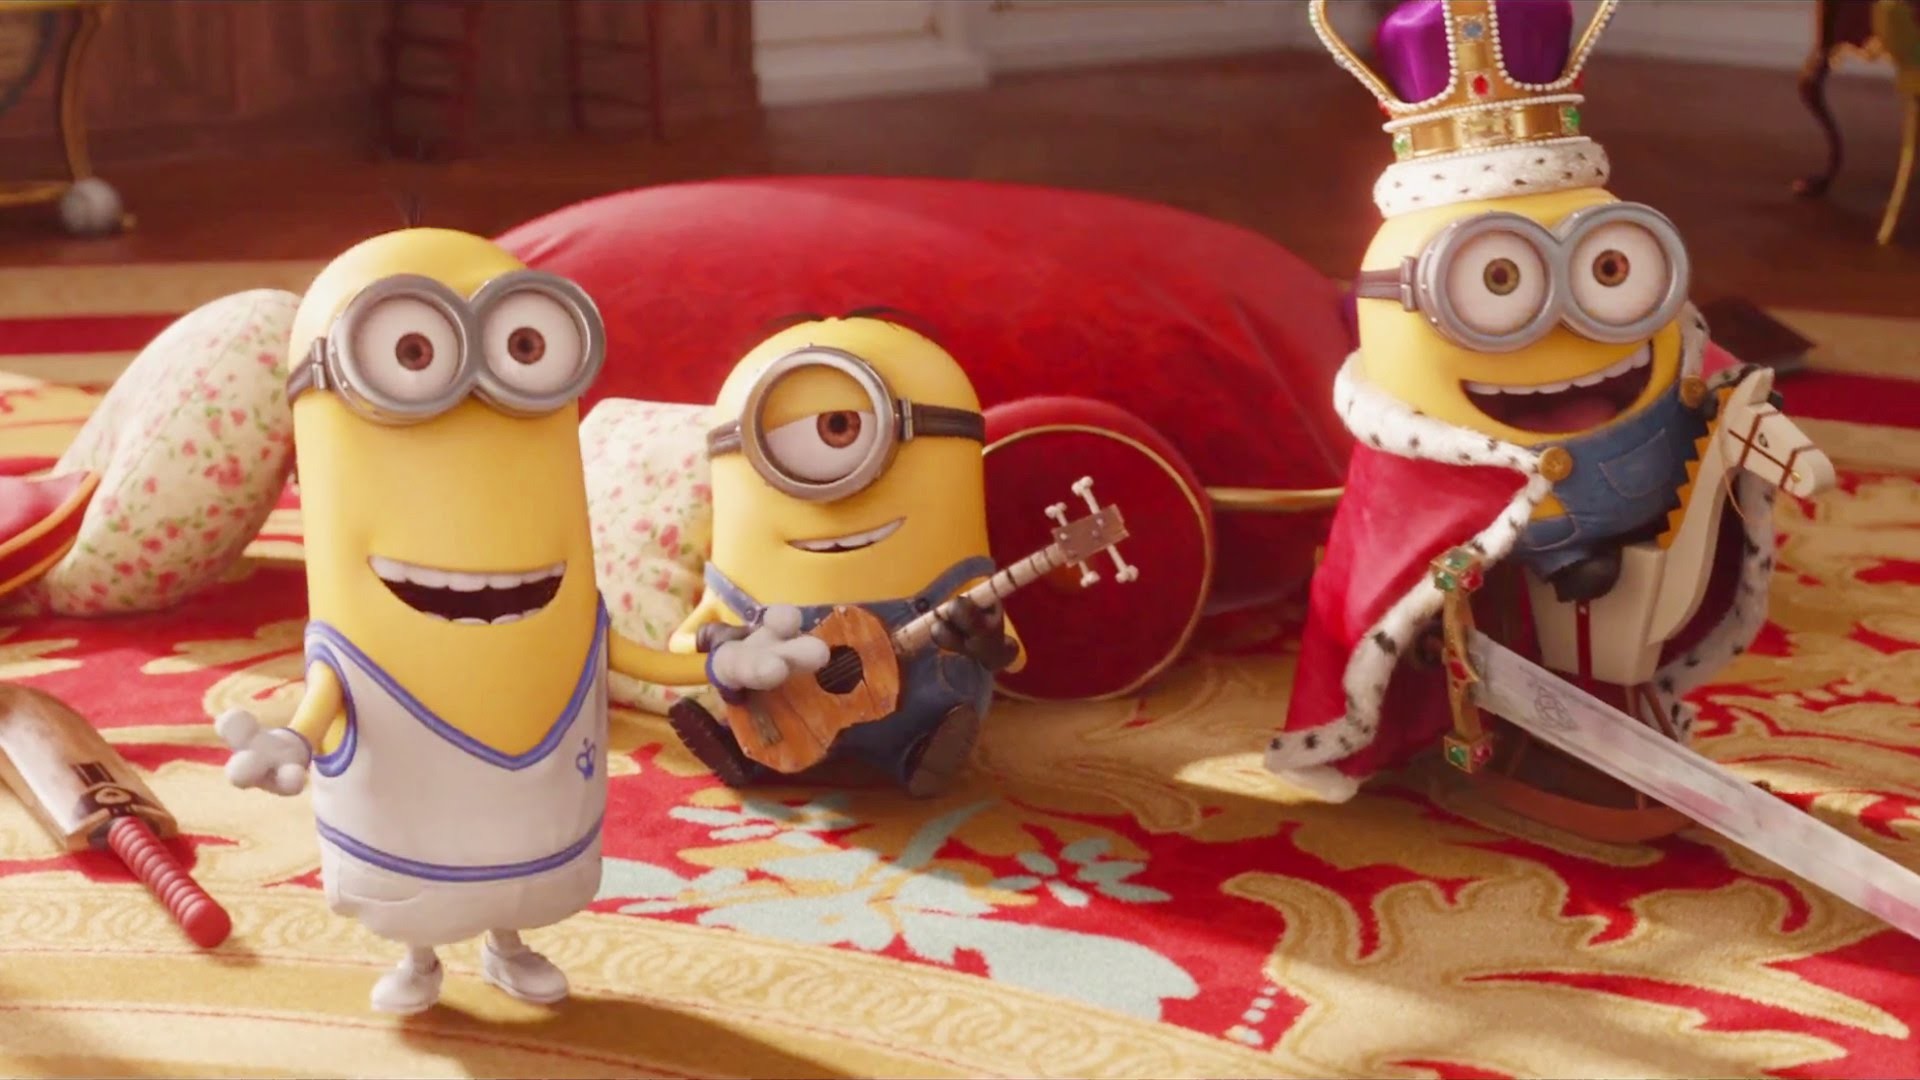 1920x1080 MINIONS - Official Trailer 3 (2015) Despicable Me Spin-off HD - YouTube